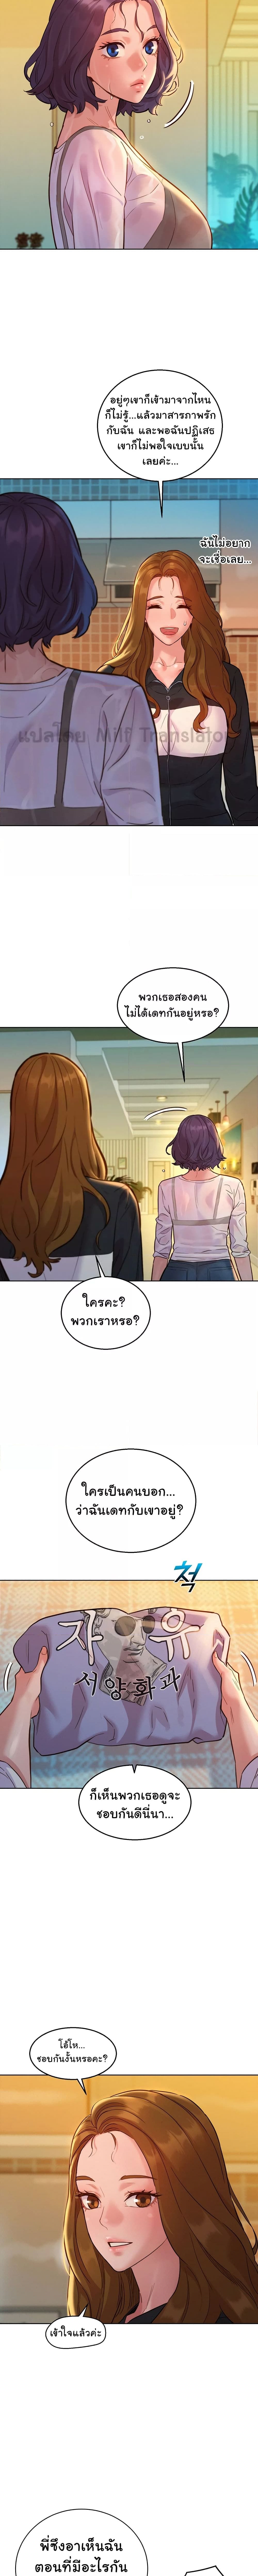 Let’s Hang Out from Today ตอนที่ 34 ภาพ 6